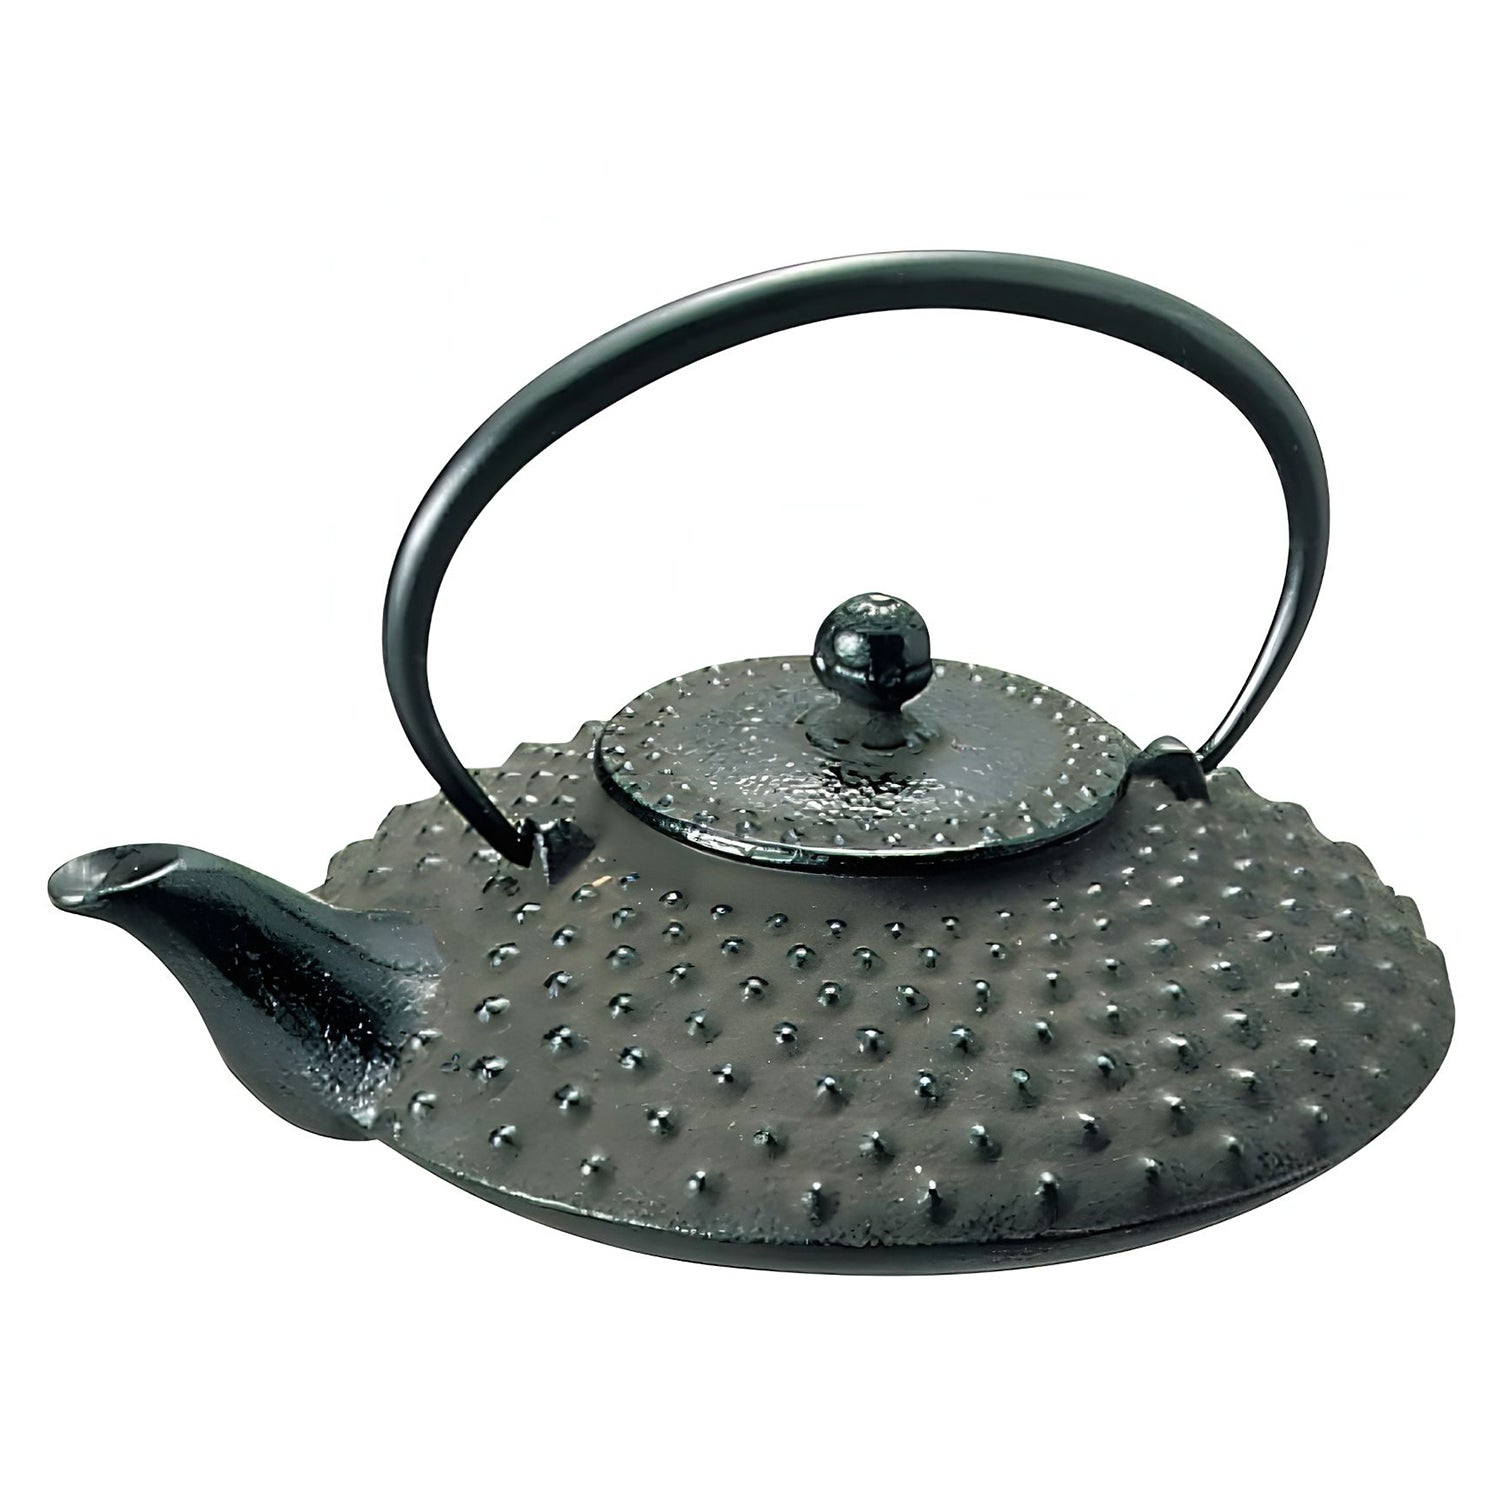 Iwachu Casting Works - The Famous Cast Iron Tea Kettle Factory